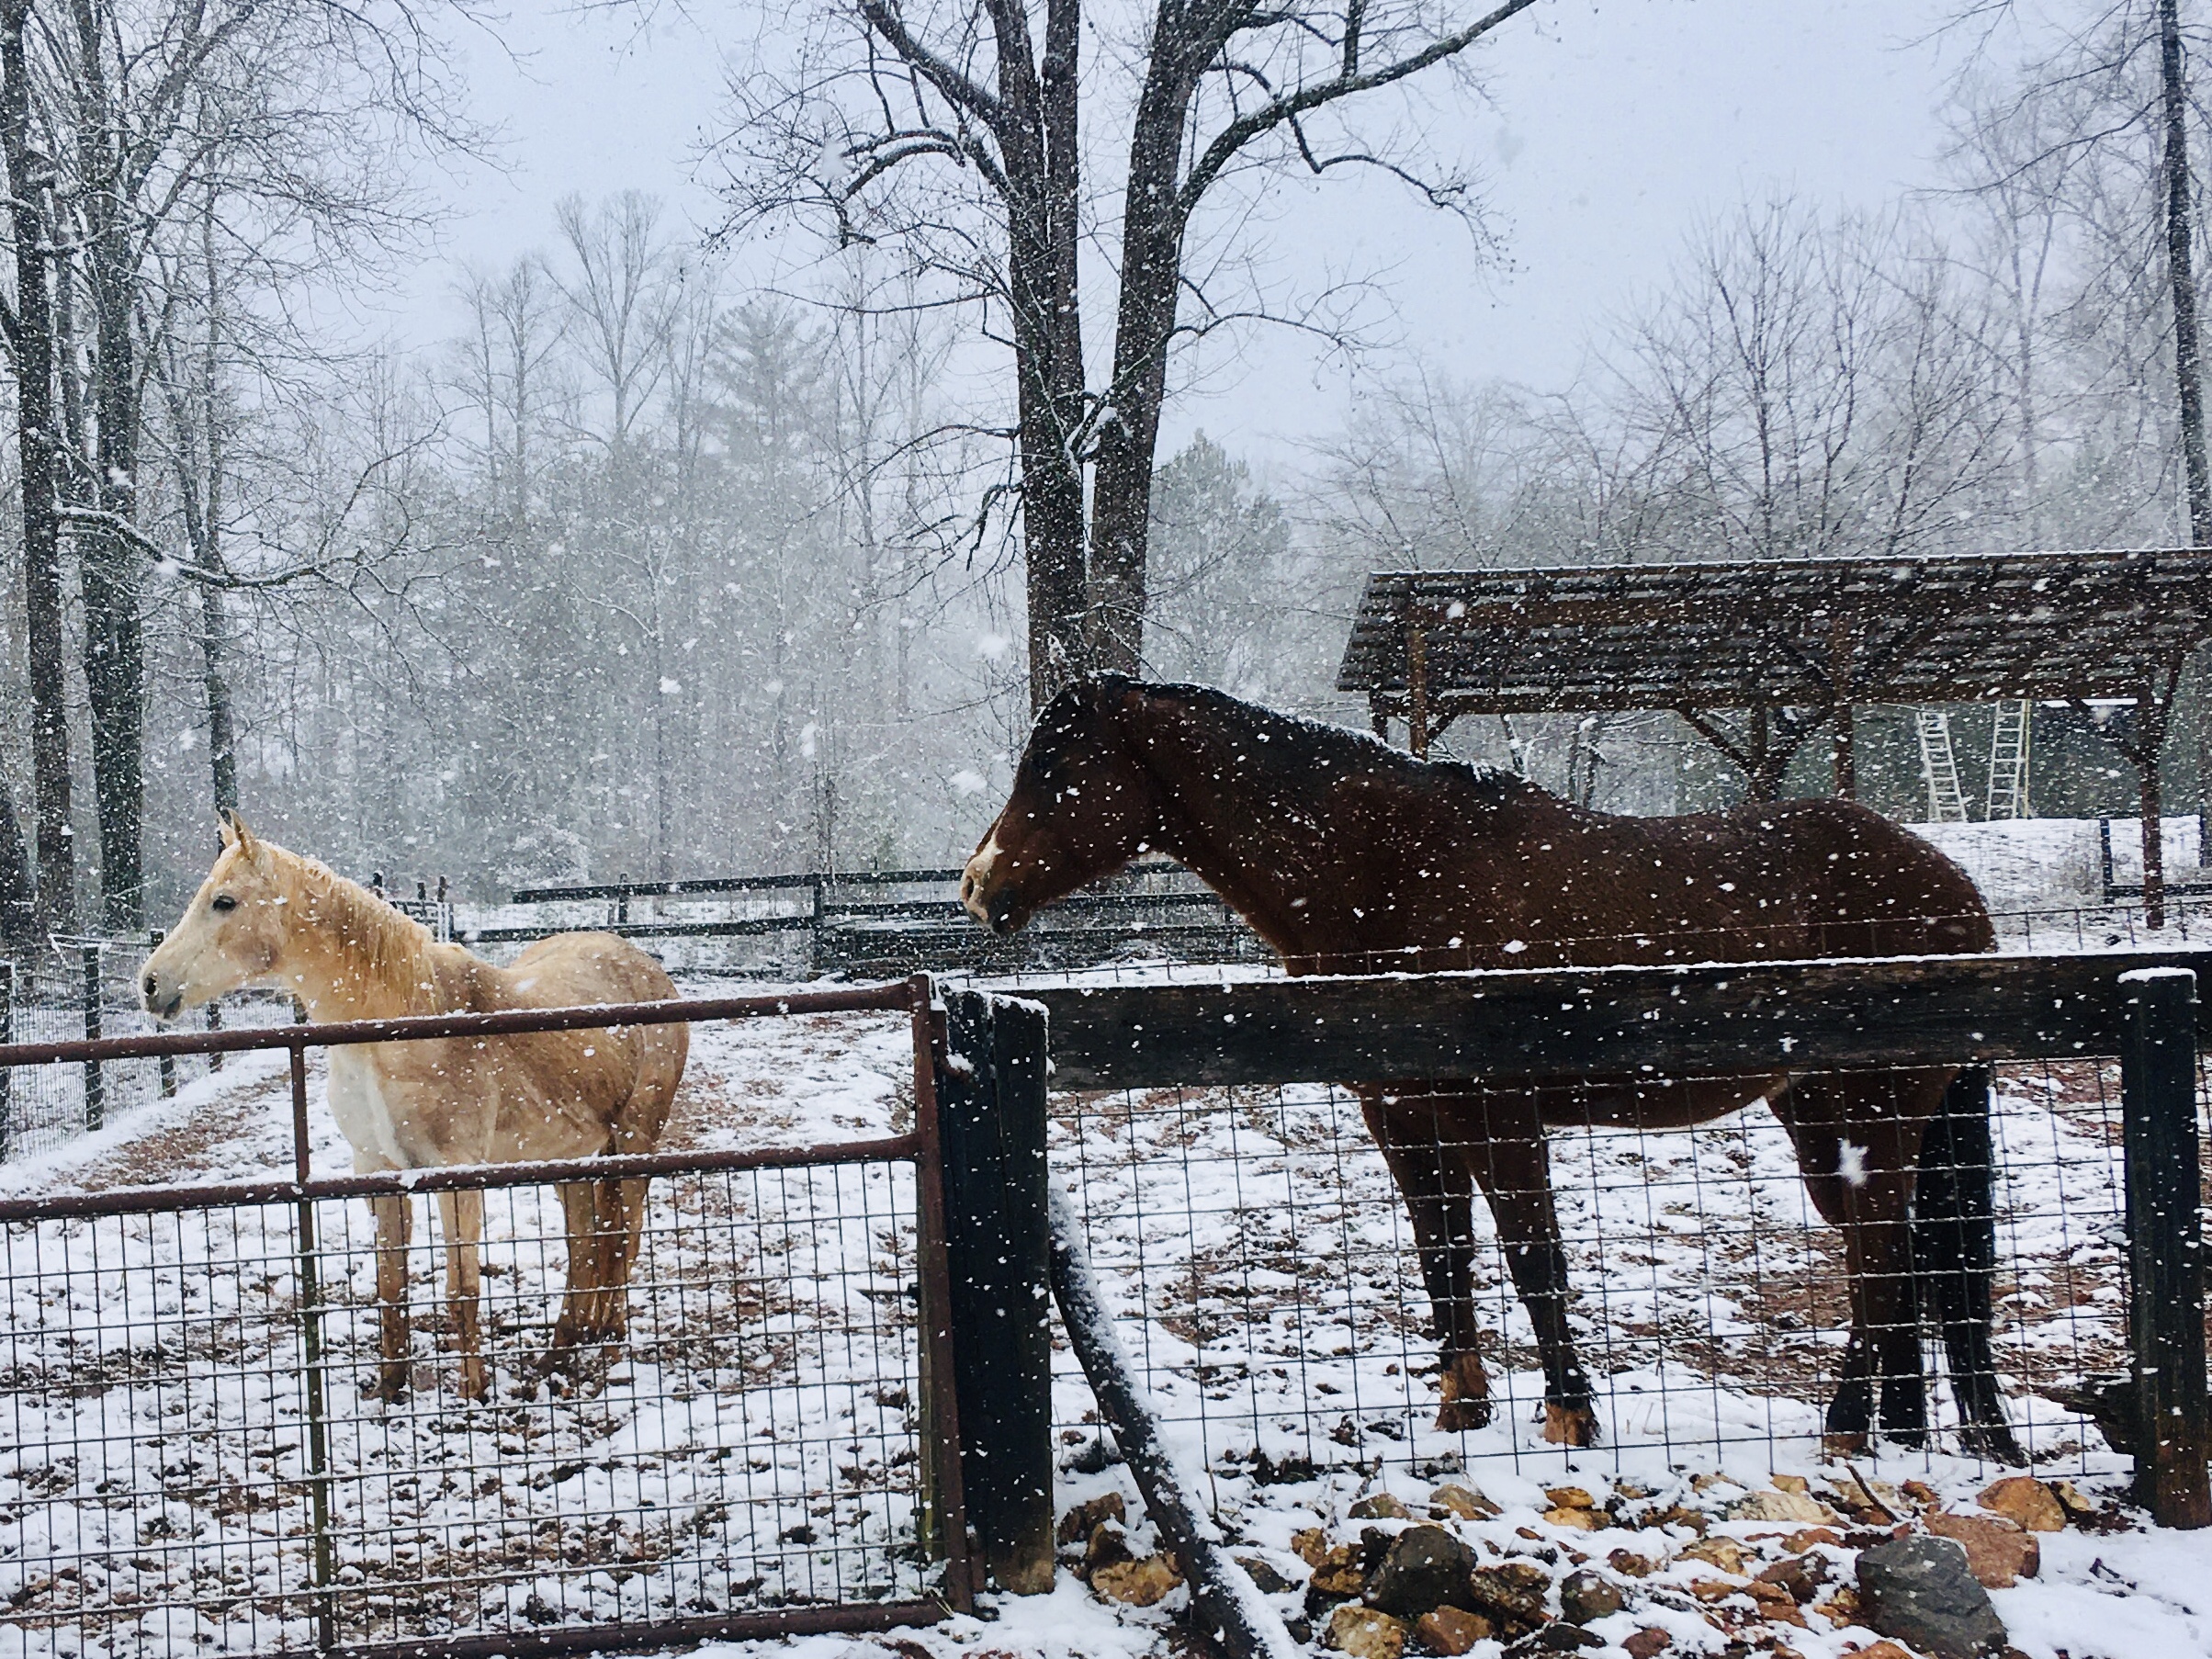 horses in a fenced in area with snow falling